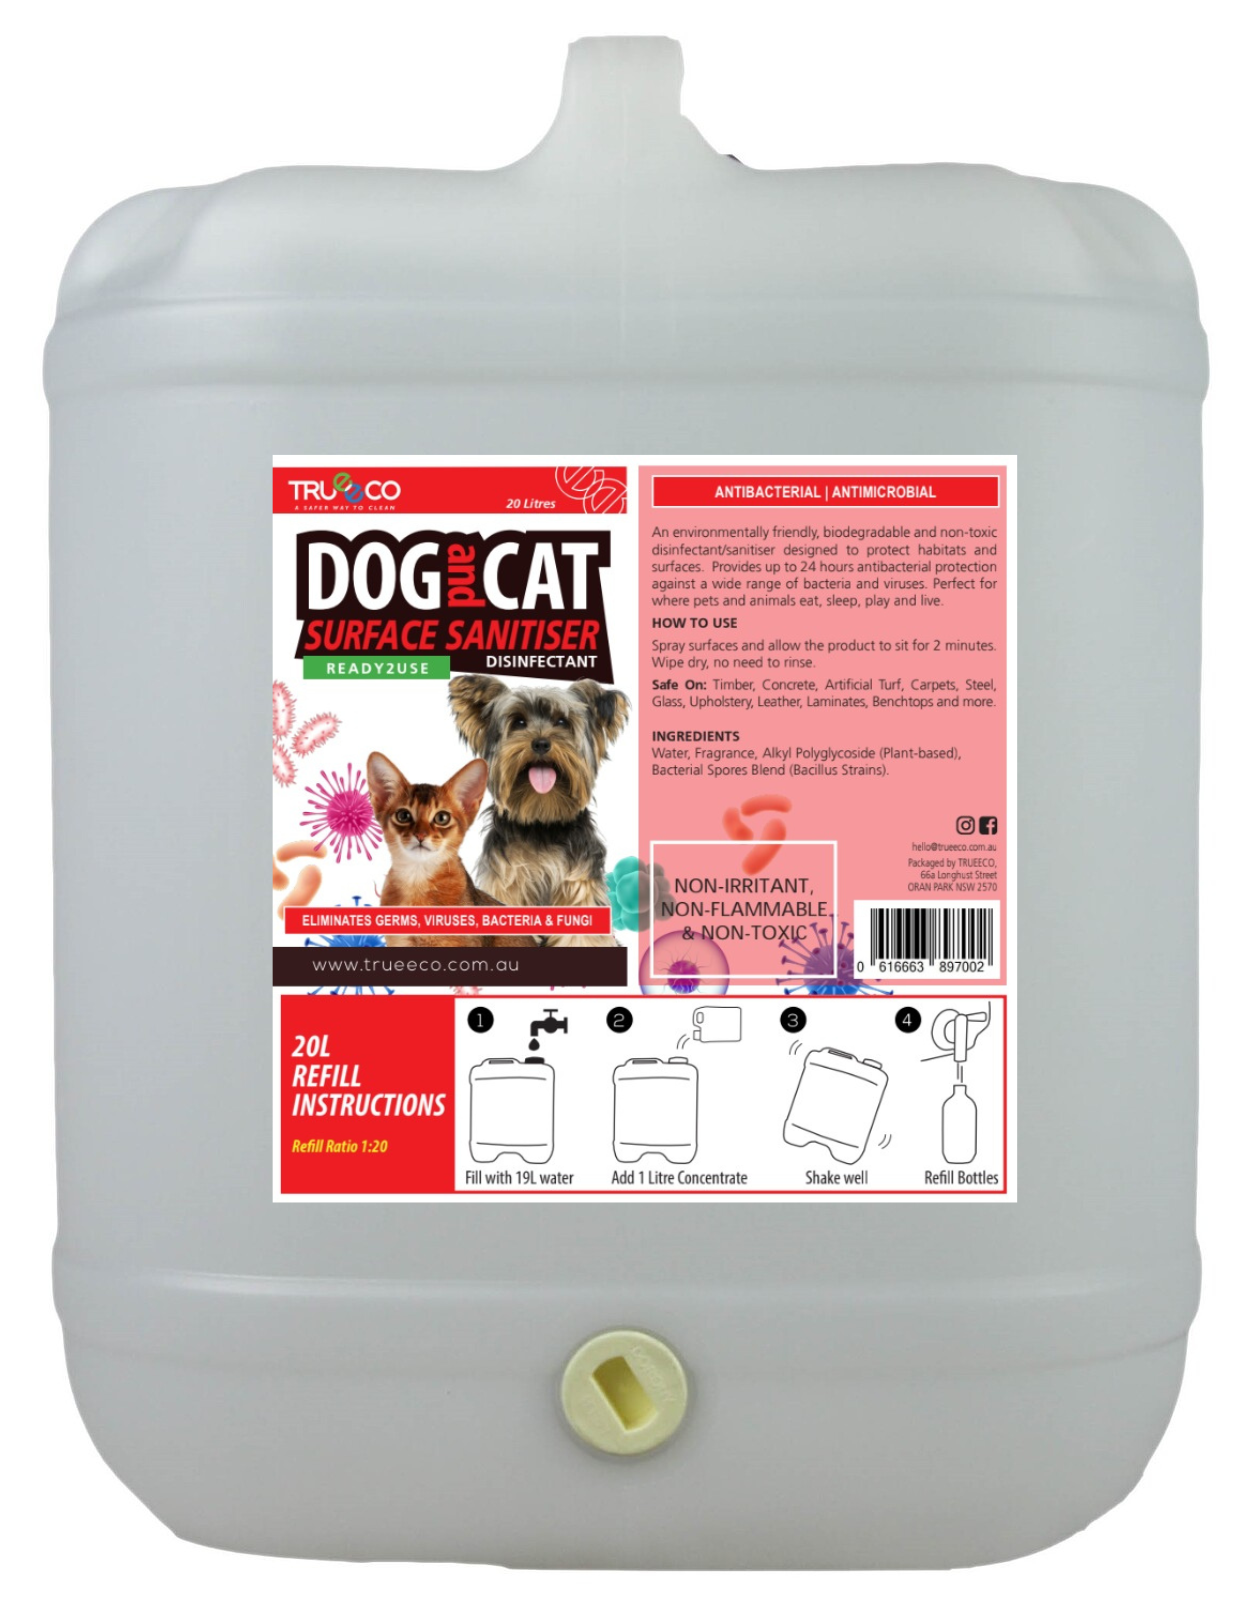 20L Dog and Cat Surface Sanitiser & Disinfectant ($11.00 per Litre Ready2use)